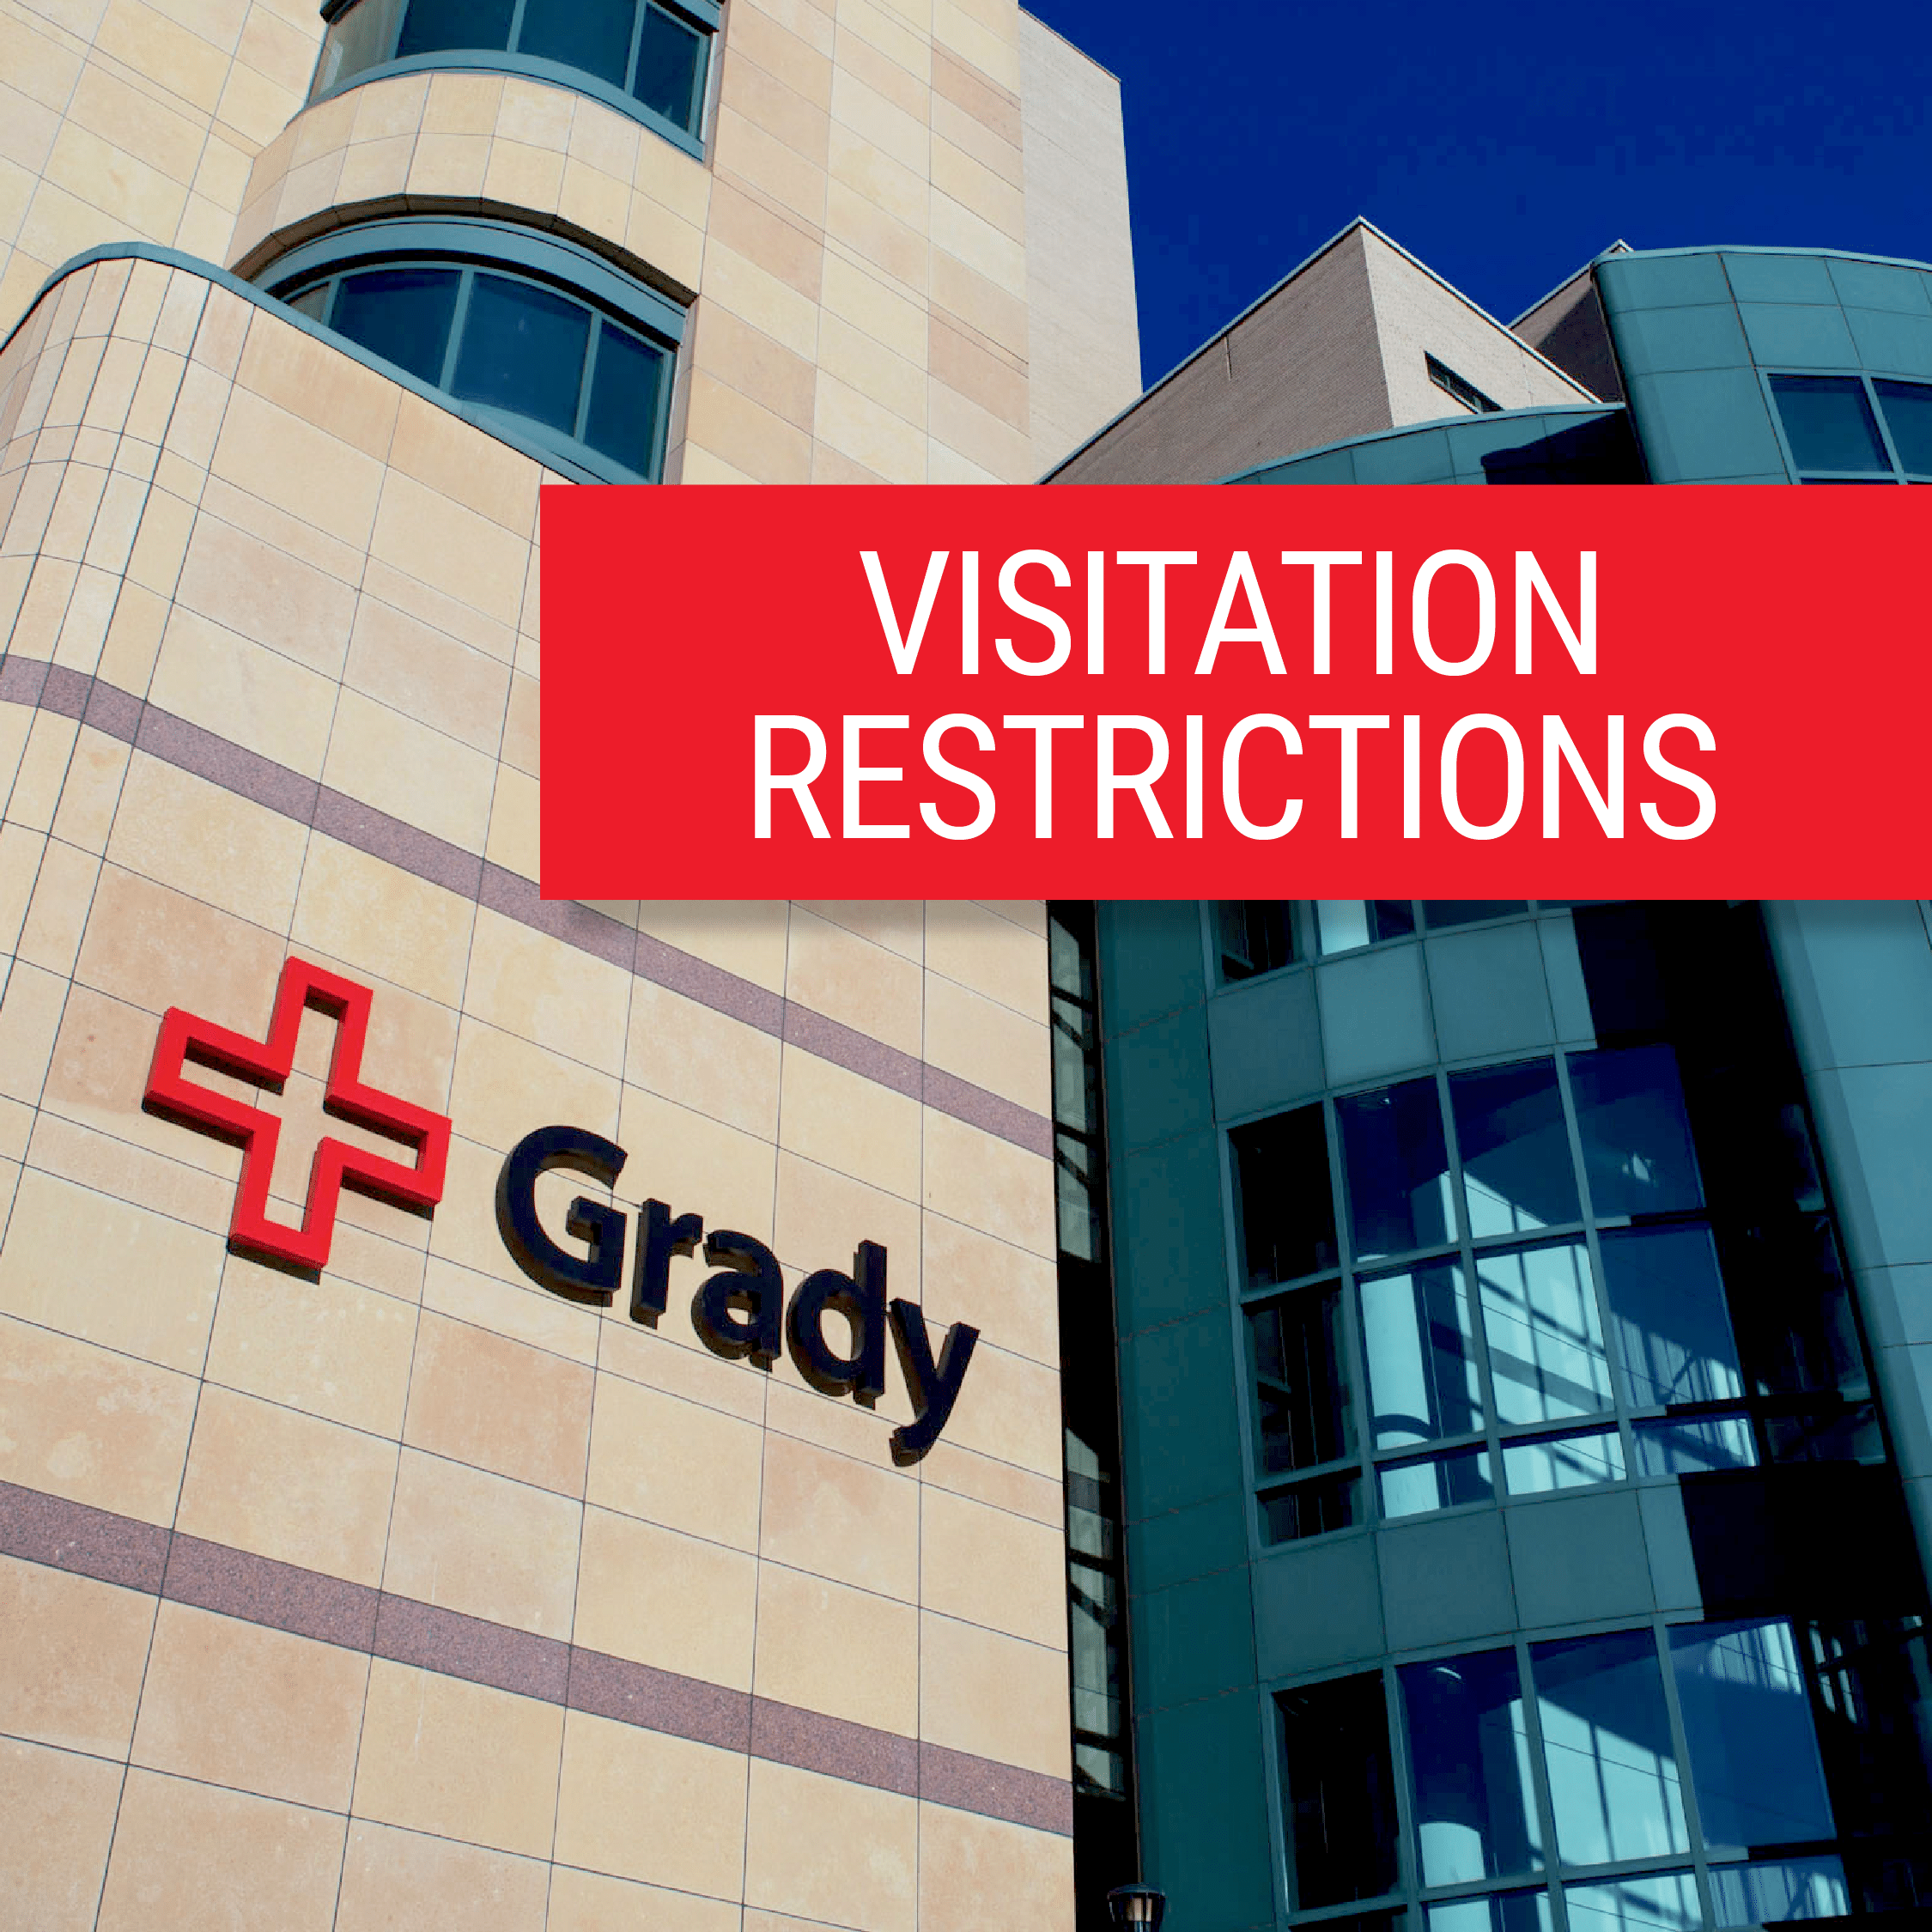 Grady Implements Higher Level Visitor Restrictions Grady Health